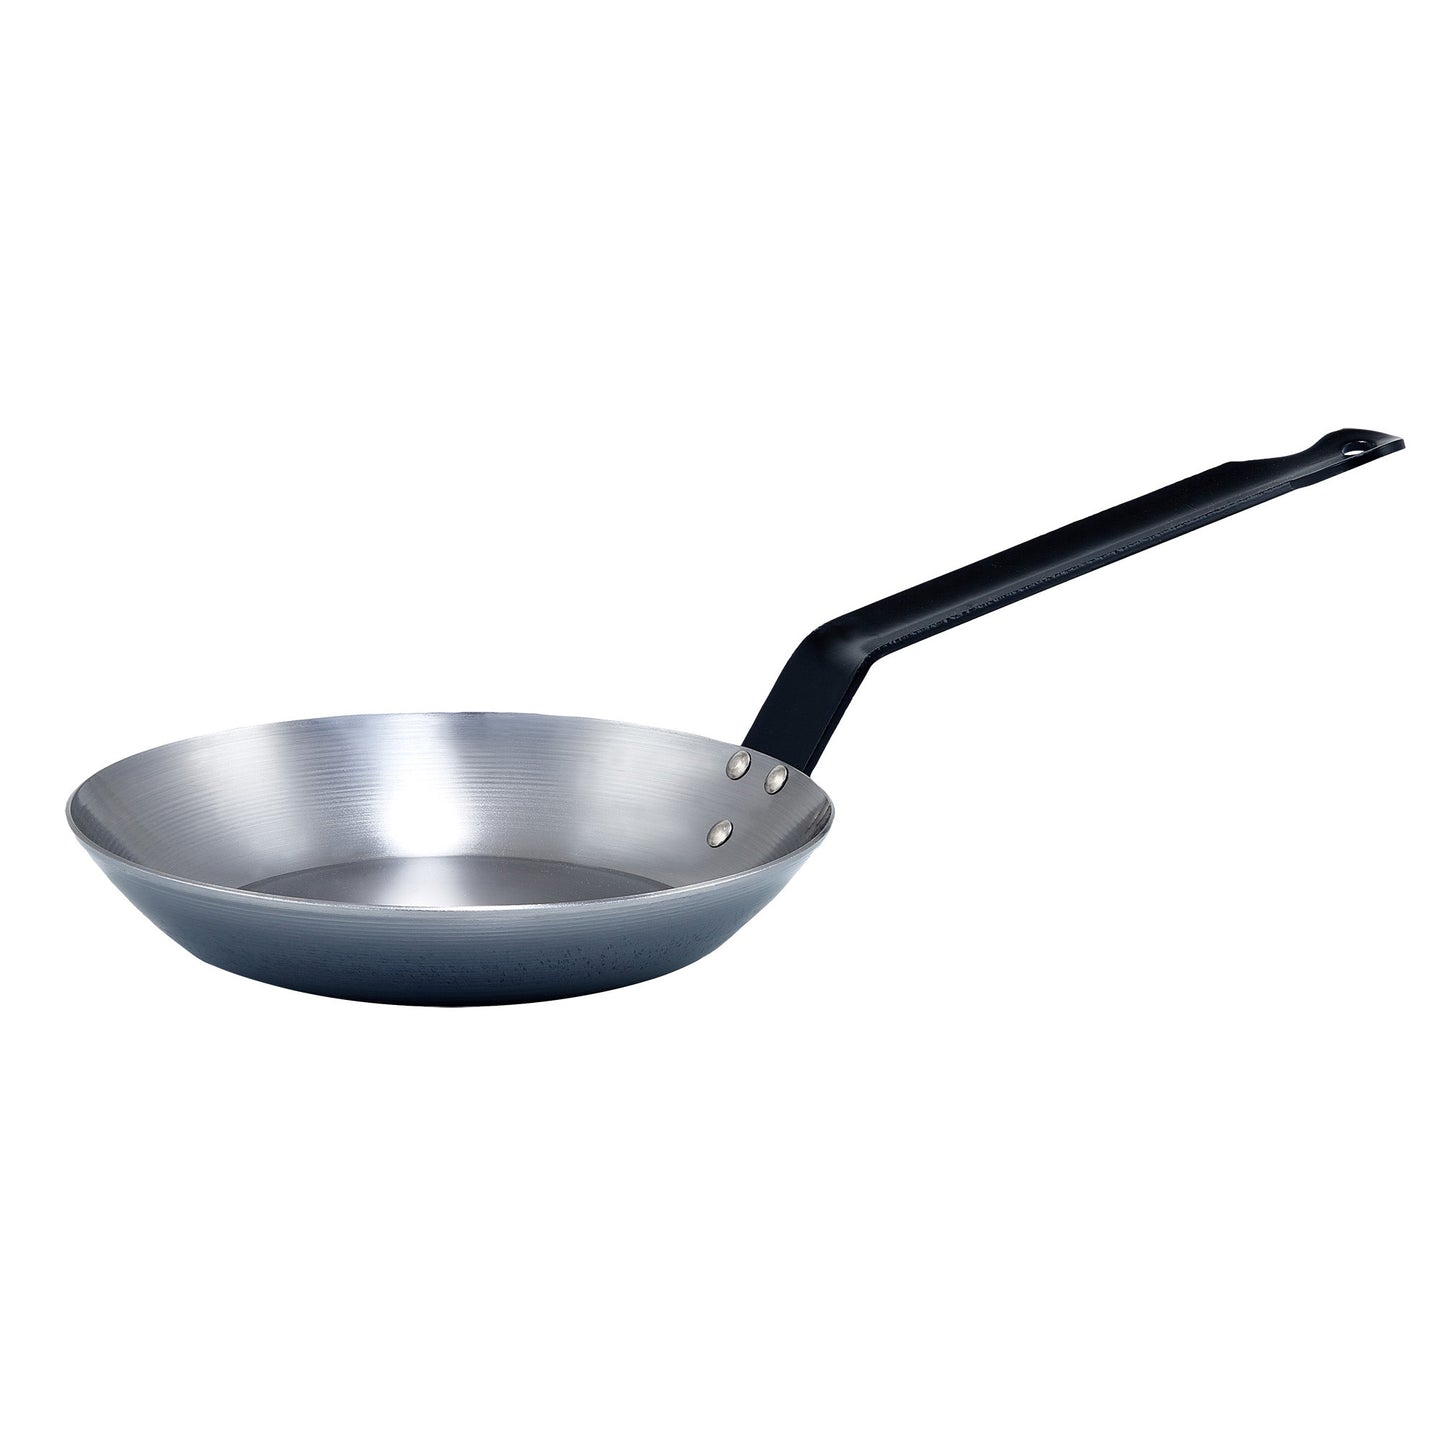 CSFP-12 - French Style Fry Pan, Polished Carbon Steel (Spain) - 11-1/8"